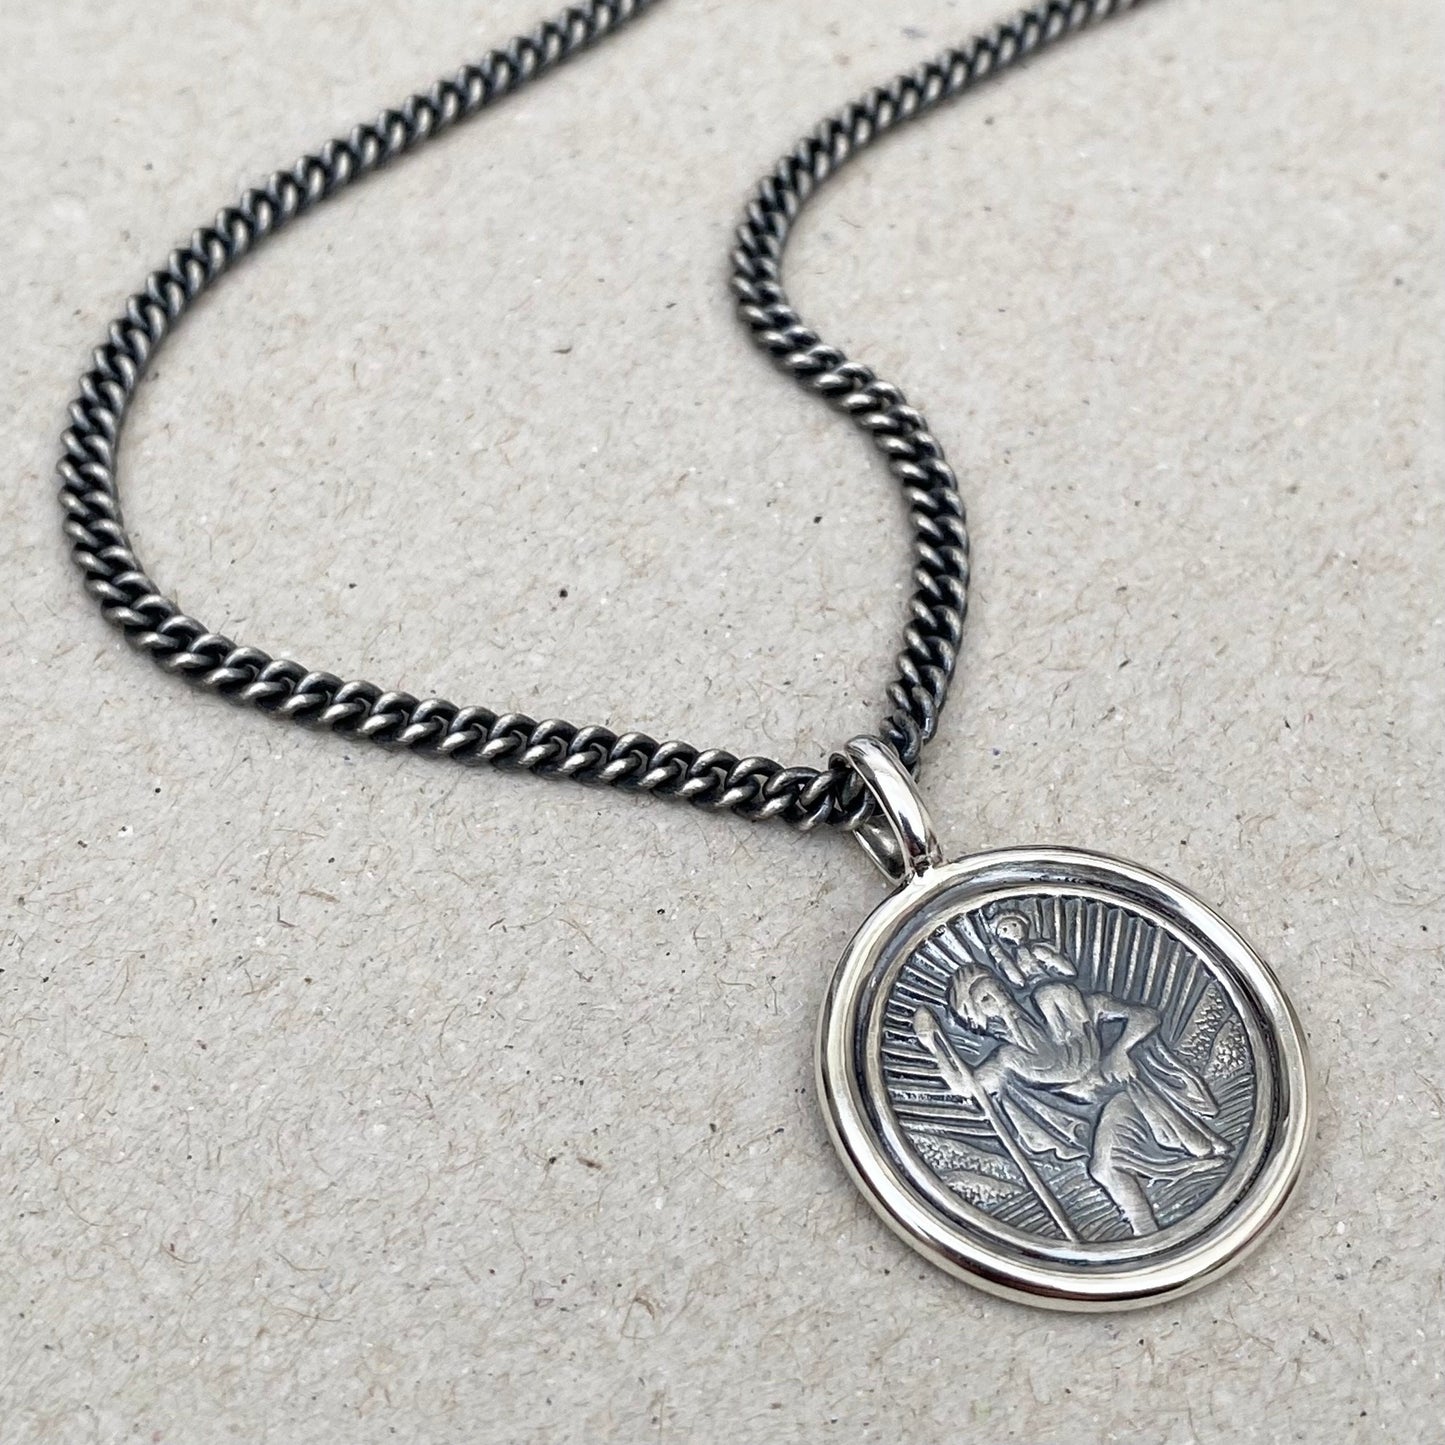 Handmade to order - Oxidised solid silver Saint Christopher circle framed pendant on a 2.9mm wide close curb chain